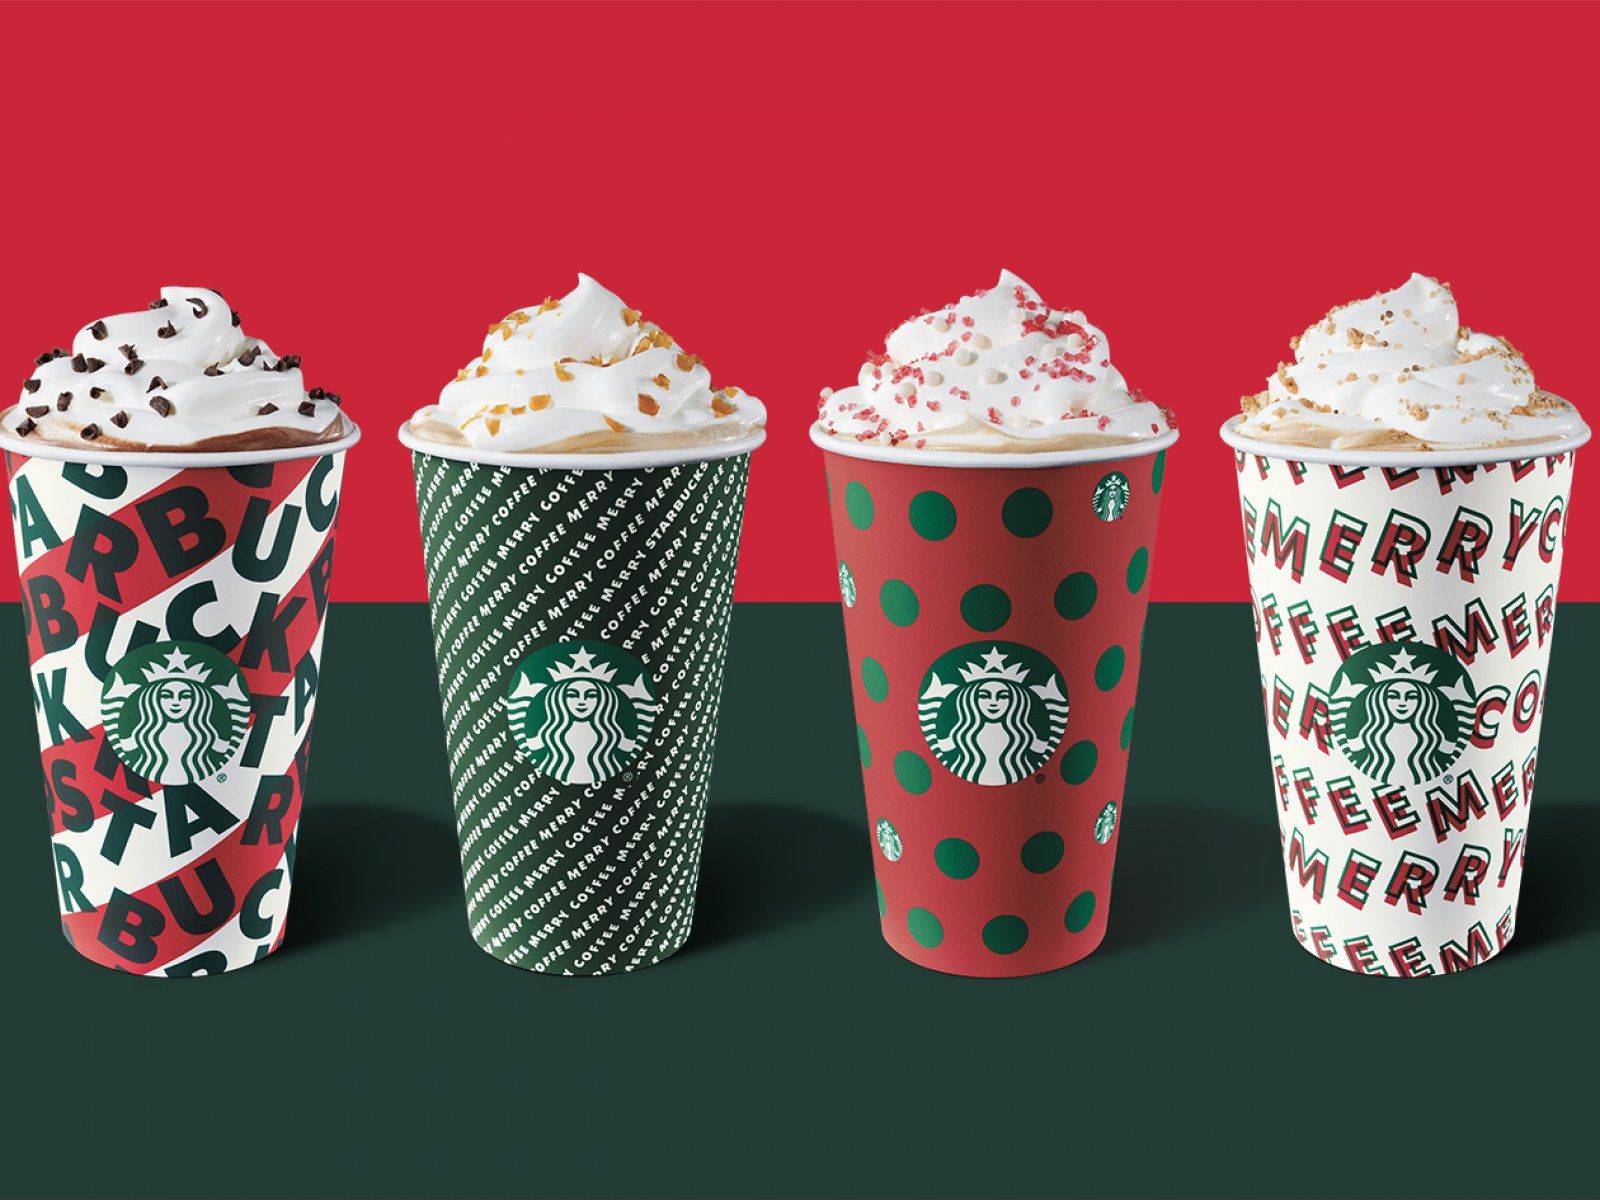 Starbucks Red Cups 2019: What Christmas Holiday Drinks are Available This Year?